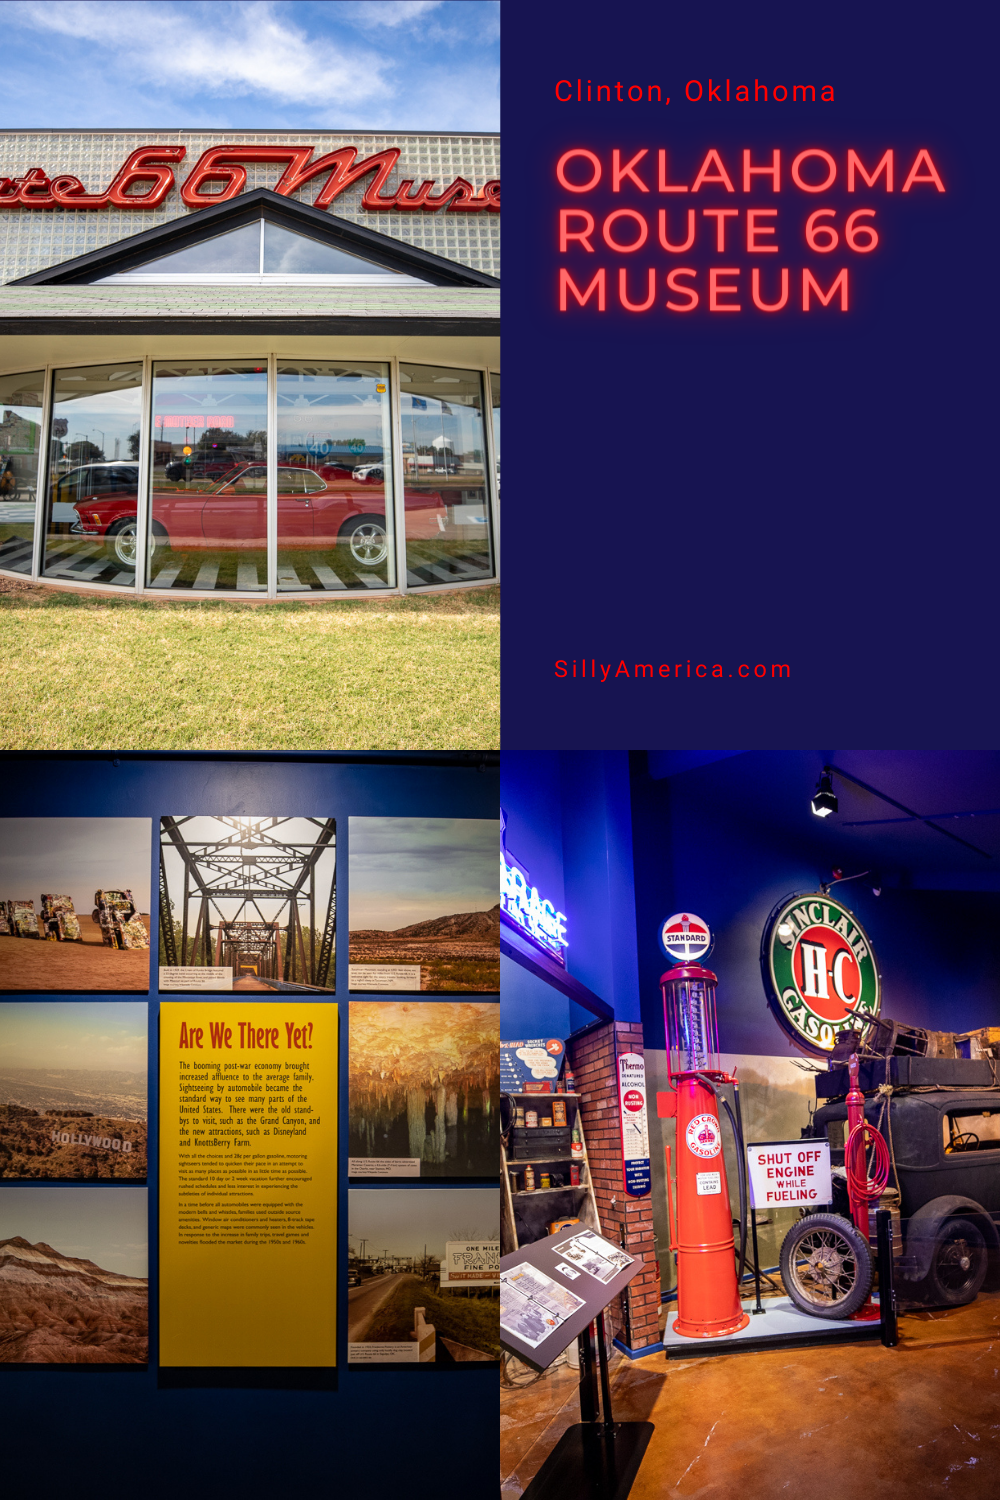 Journey through the history of the Main Street of America in Oklahoma. The Oklahoma Route 66 Museum in Clinton takes you on a tale through time. Just pull over when you see the bright red neon sign and the bright red vintage car in the window. Visit this Oklahoma attraction on a Route 66 road trip.  #RoadTrips #RoadTripStop #Route66 #Route66RoadTrip #OklahomaRoute66 #Oklahoma #OklahomaRoadTrip #OklahomaRoadsideAttractions #RoadsideAttractions #RoadsideAttraction #RoadsideAmerica #RoadTrip